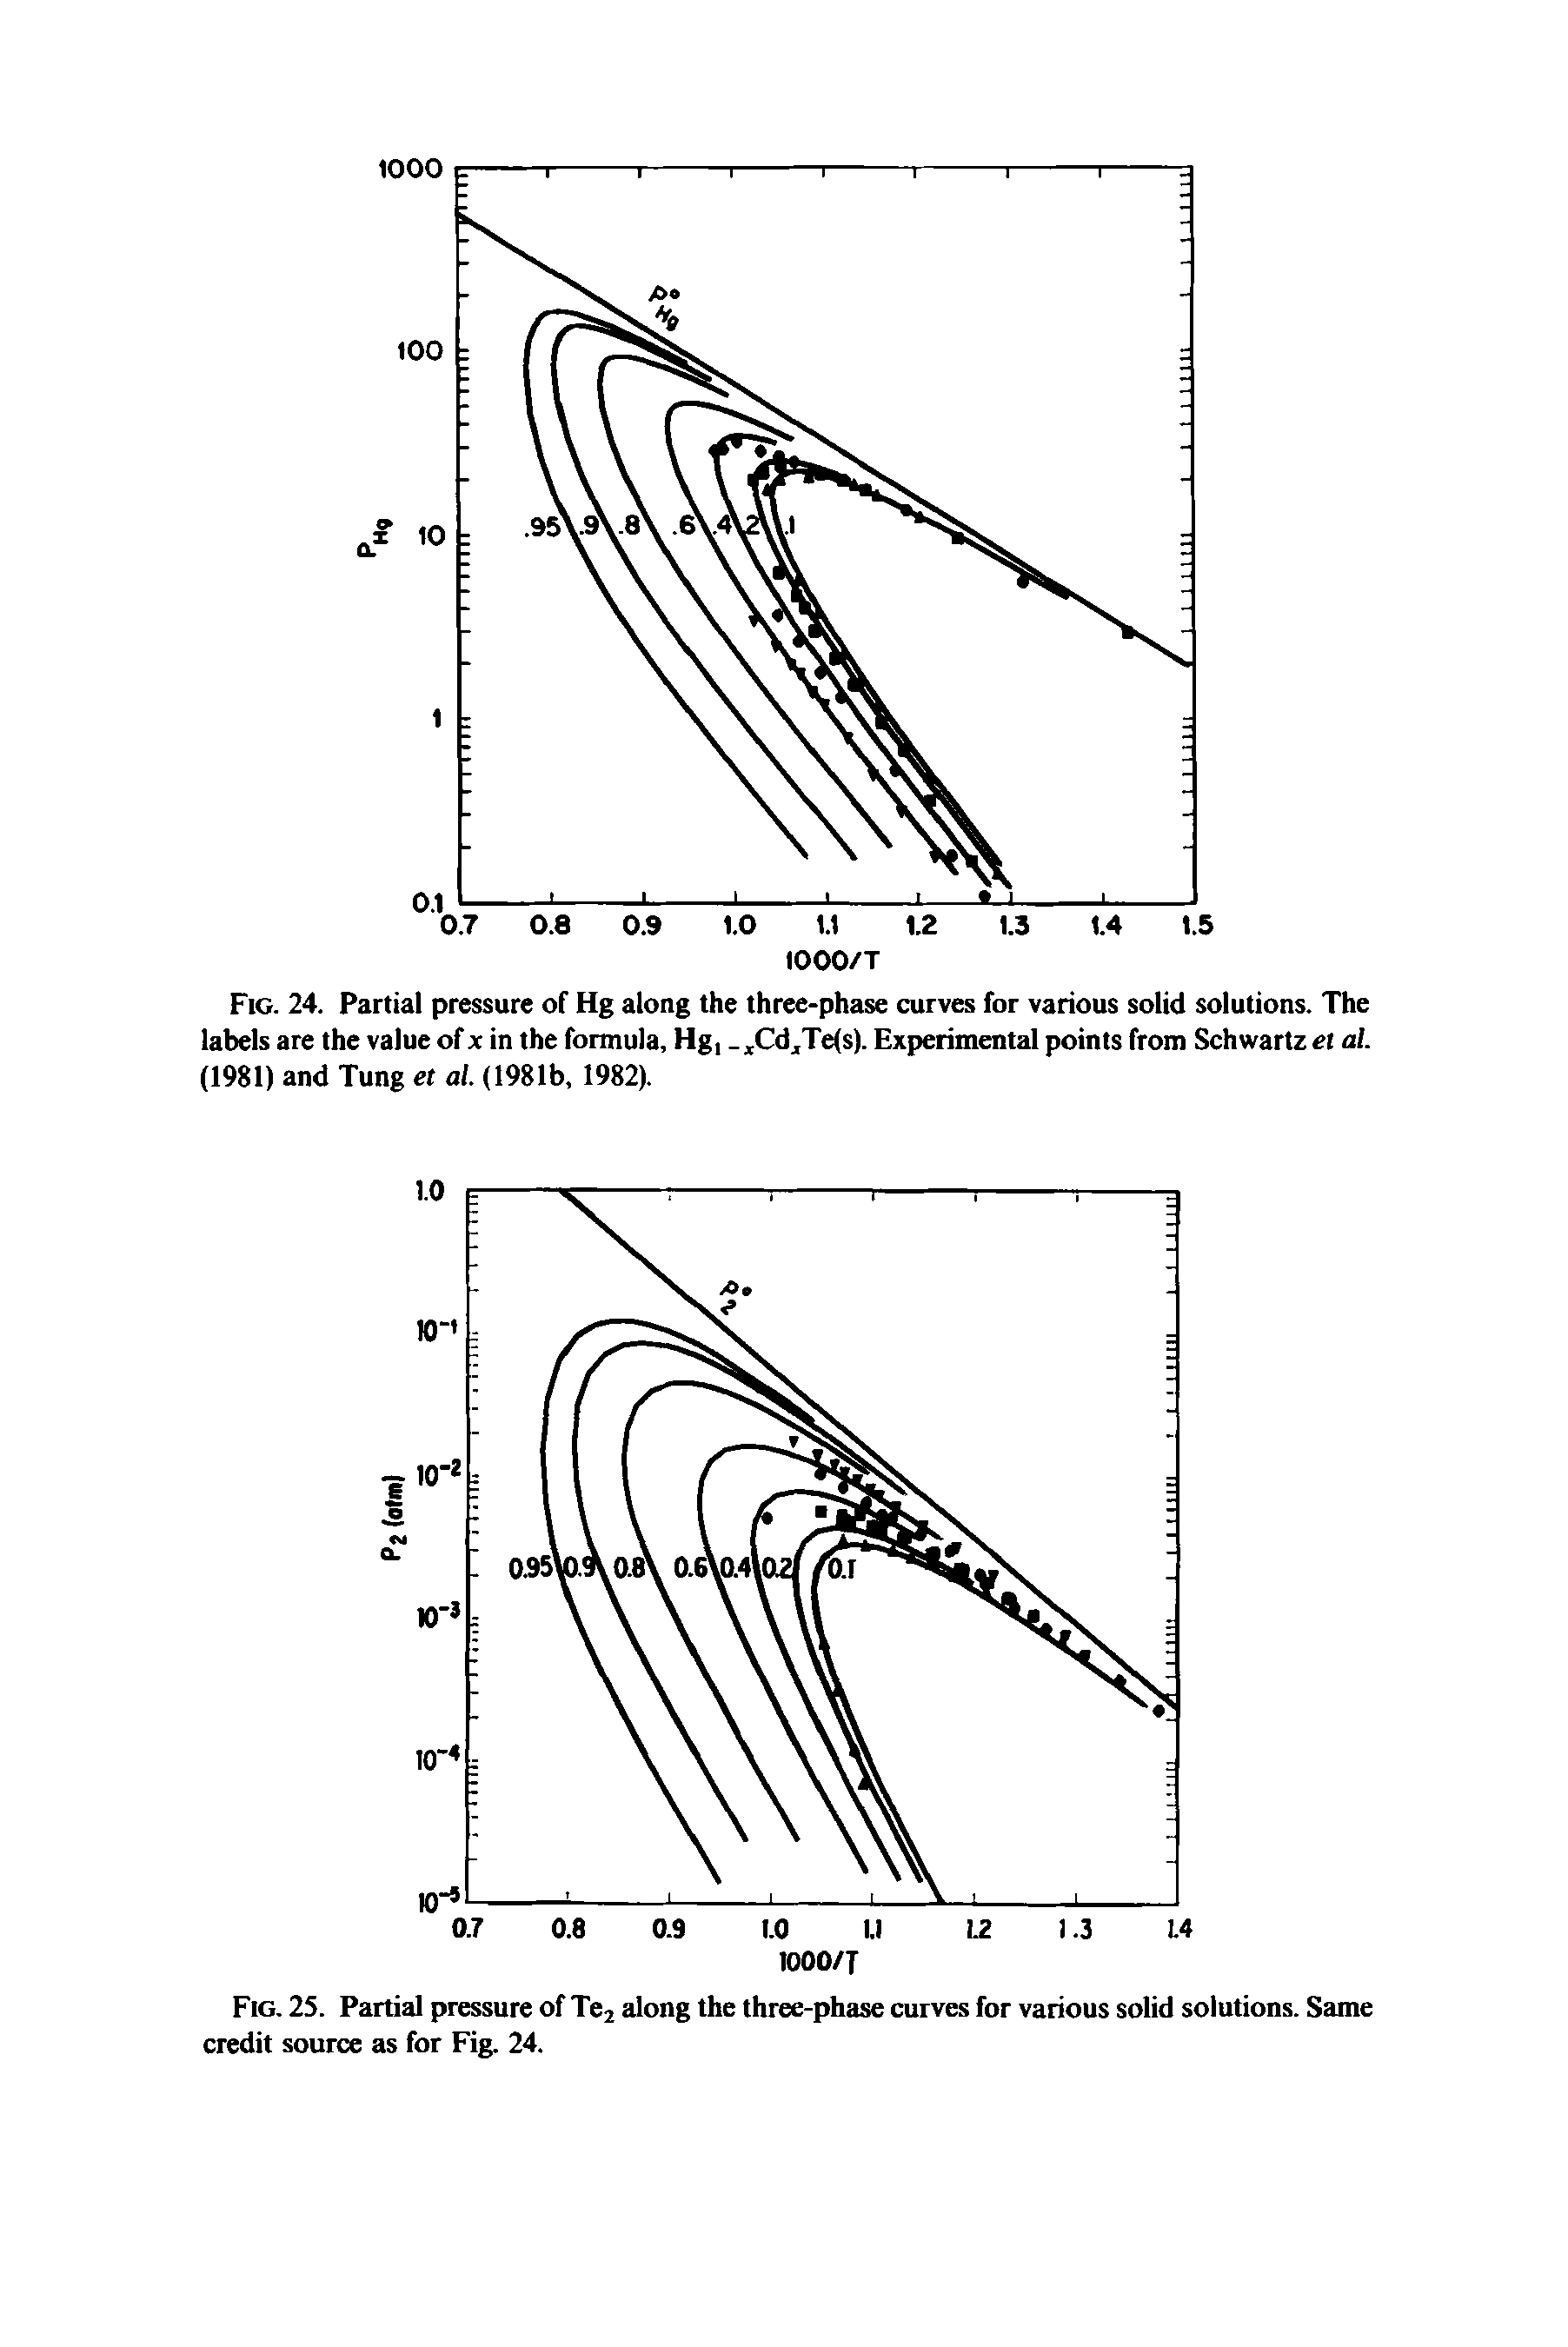 Fig. 25. Partial pressure of Te2 along the three-phase curves for various solid solutions. Same credit source as for Fig. 24.